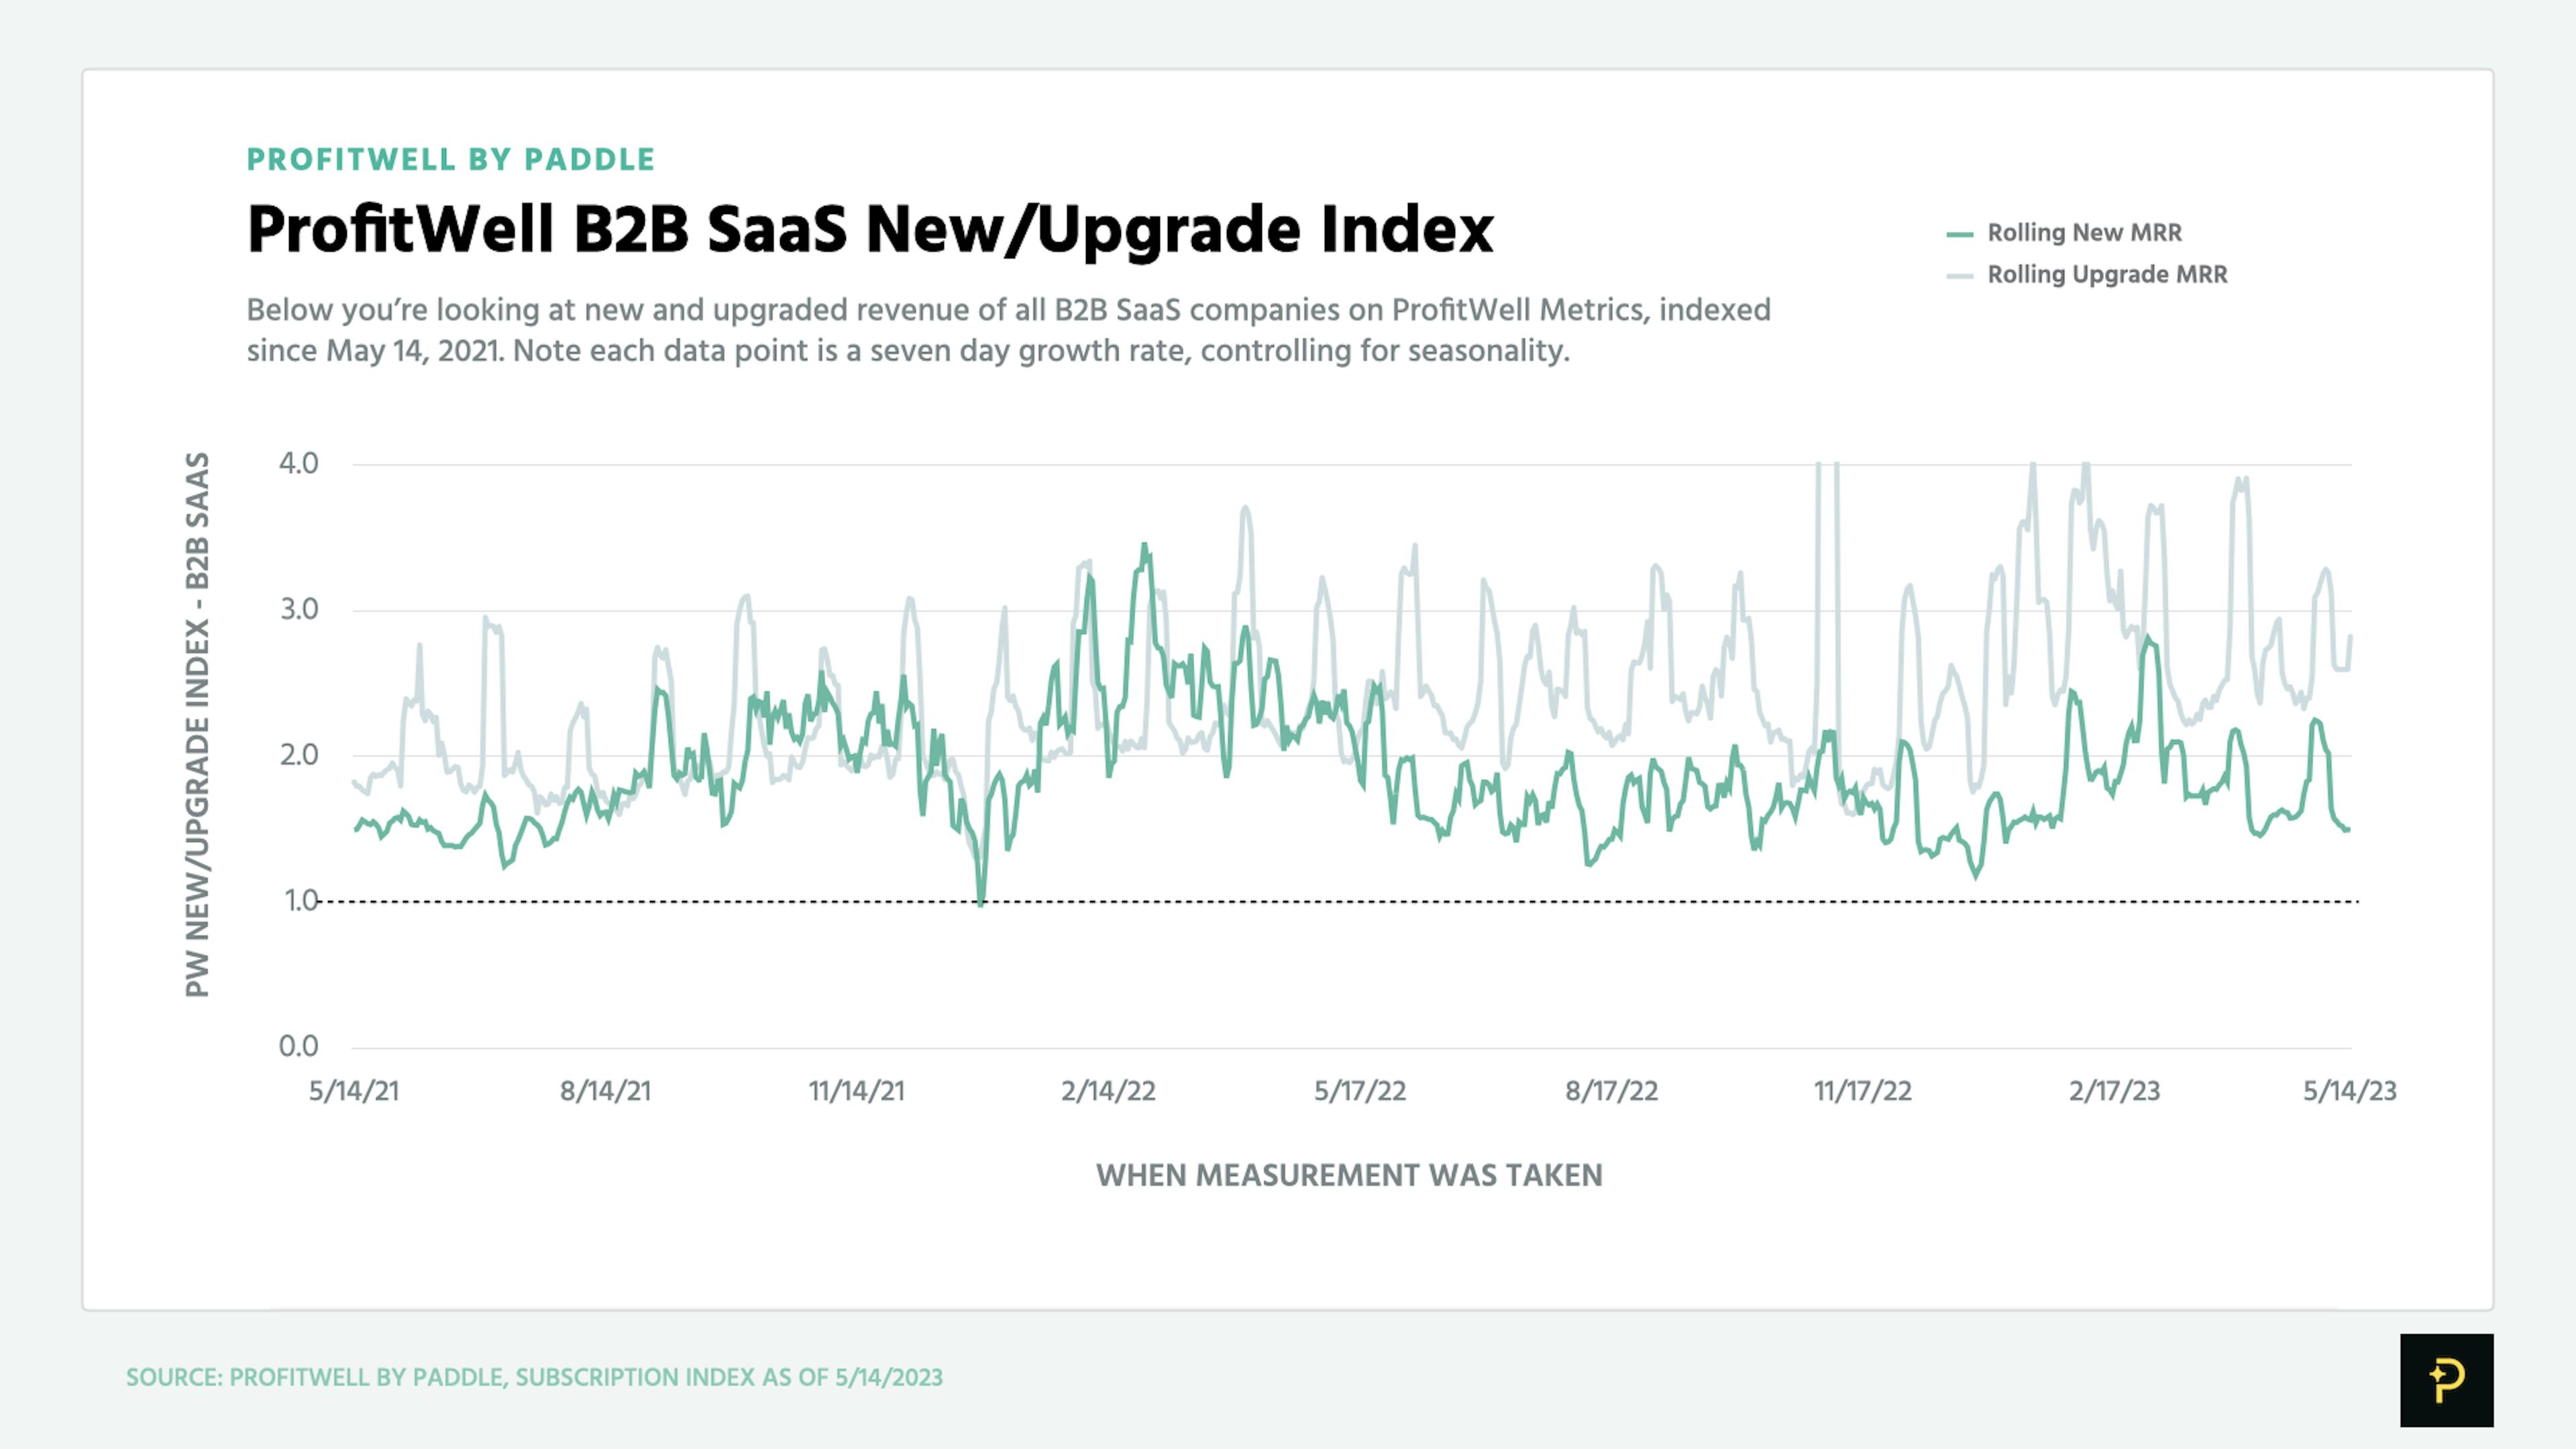 May 2023 chart of the ProfitWell B2B SaaS New/Upgrade Index, showing readings fading back towards the baseline after a Q1 spike, average around 1.5.